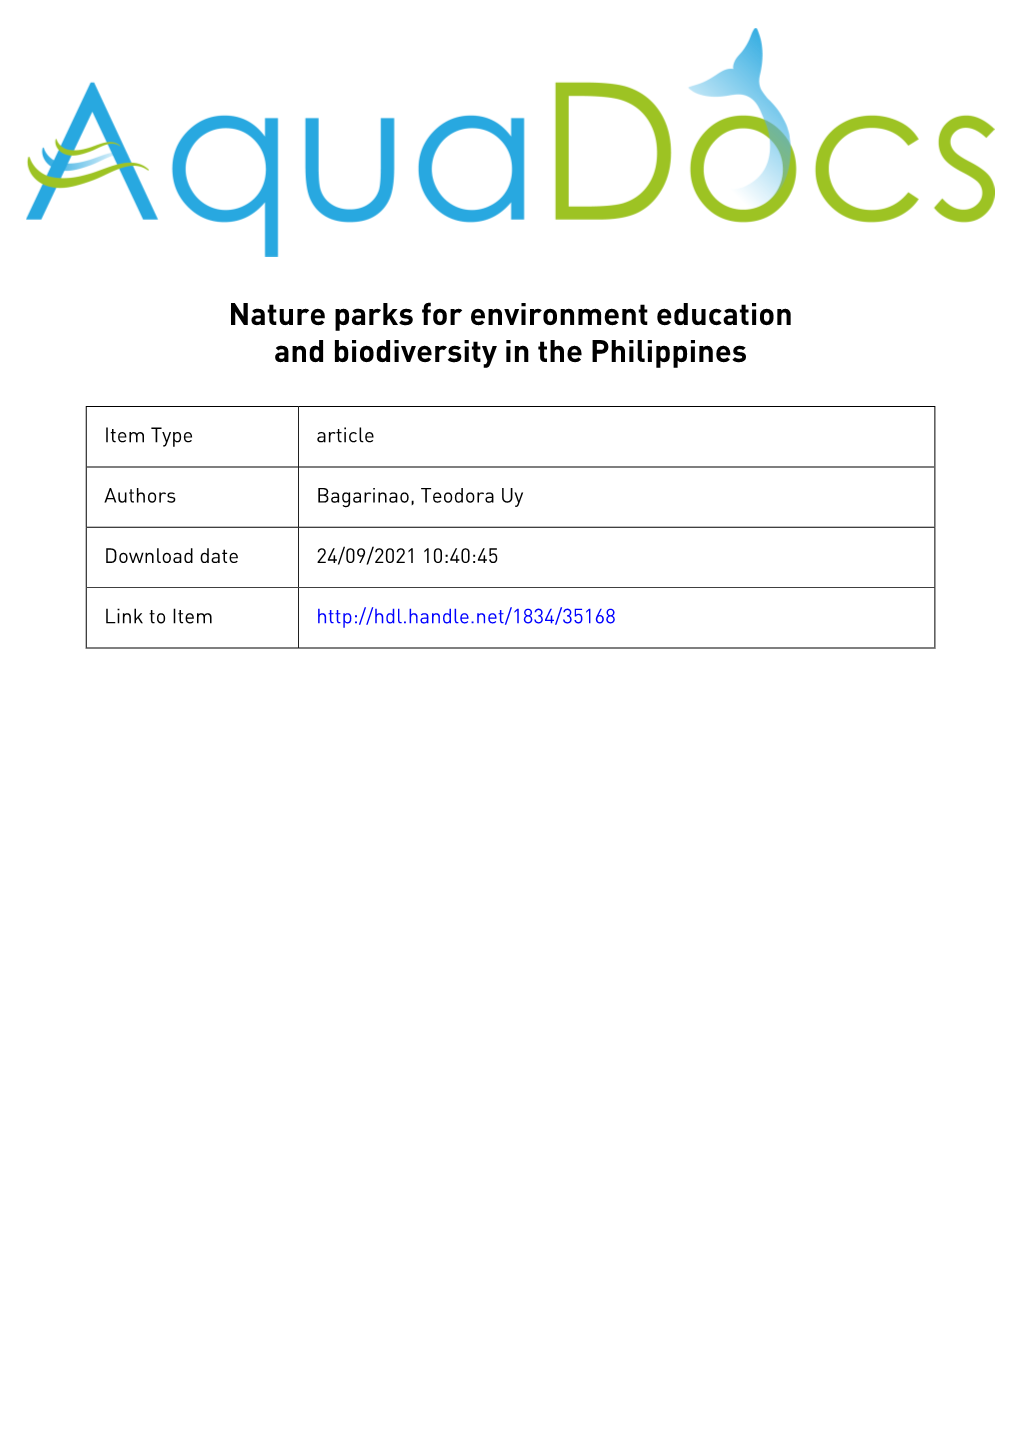 Nature Parks for Environment Education and Biodiversity in the Philippines